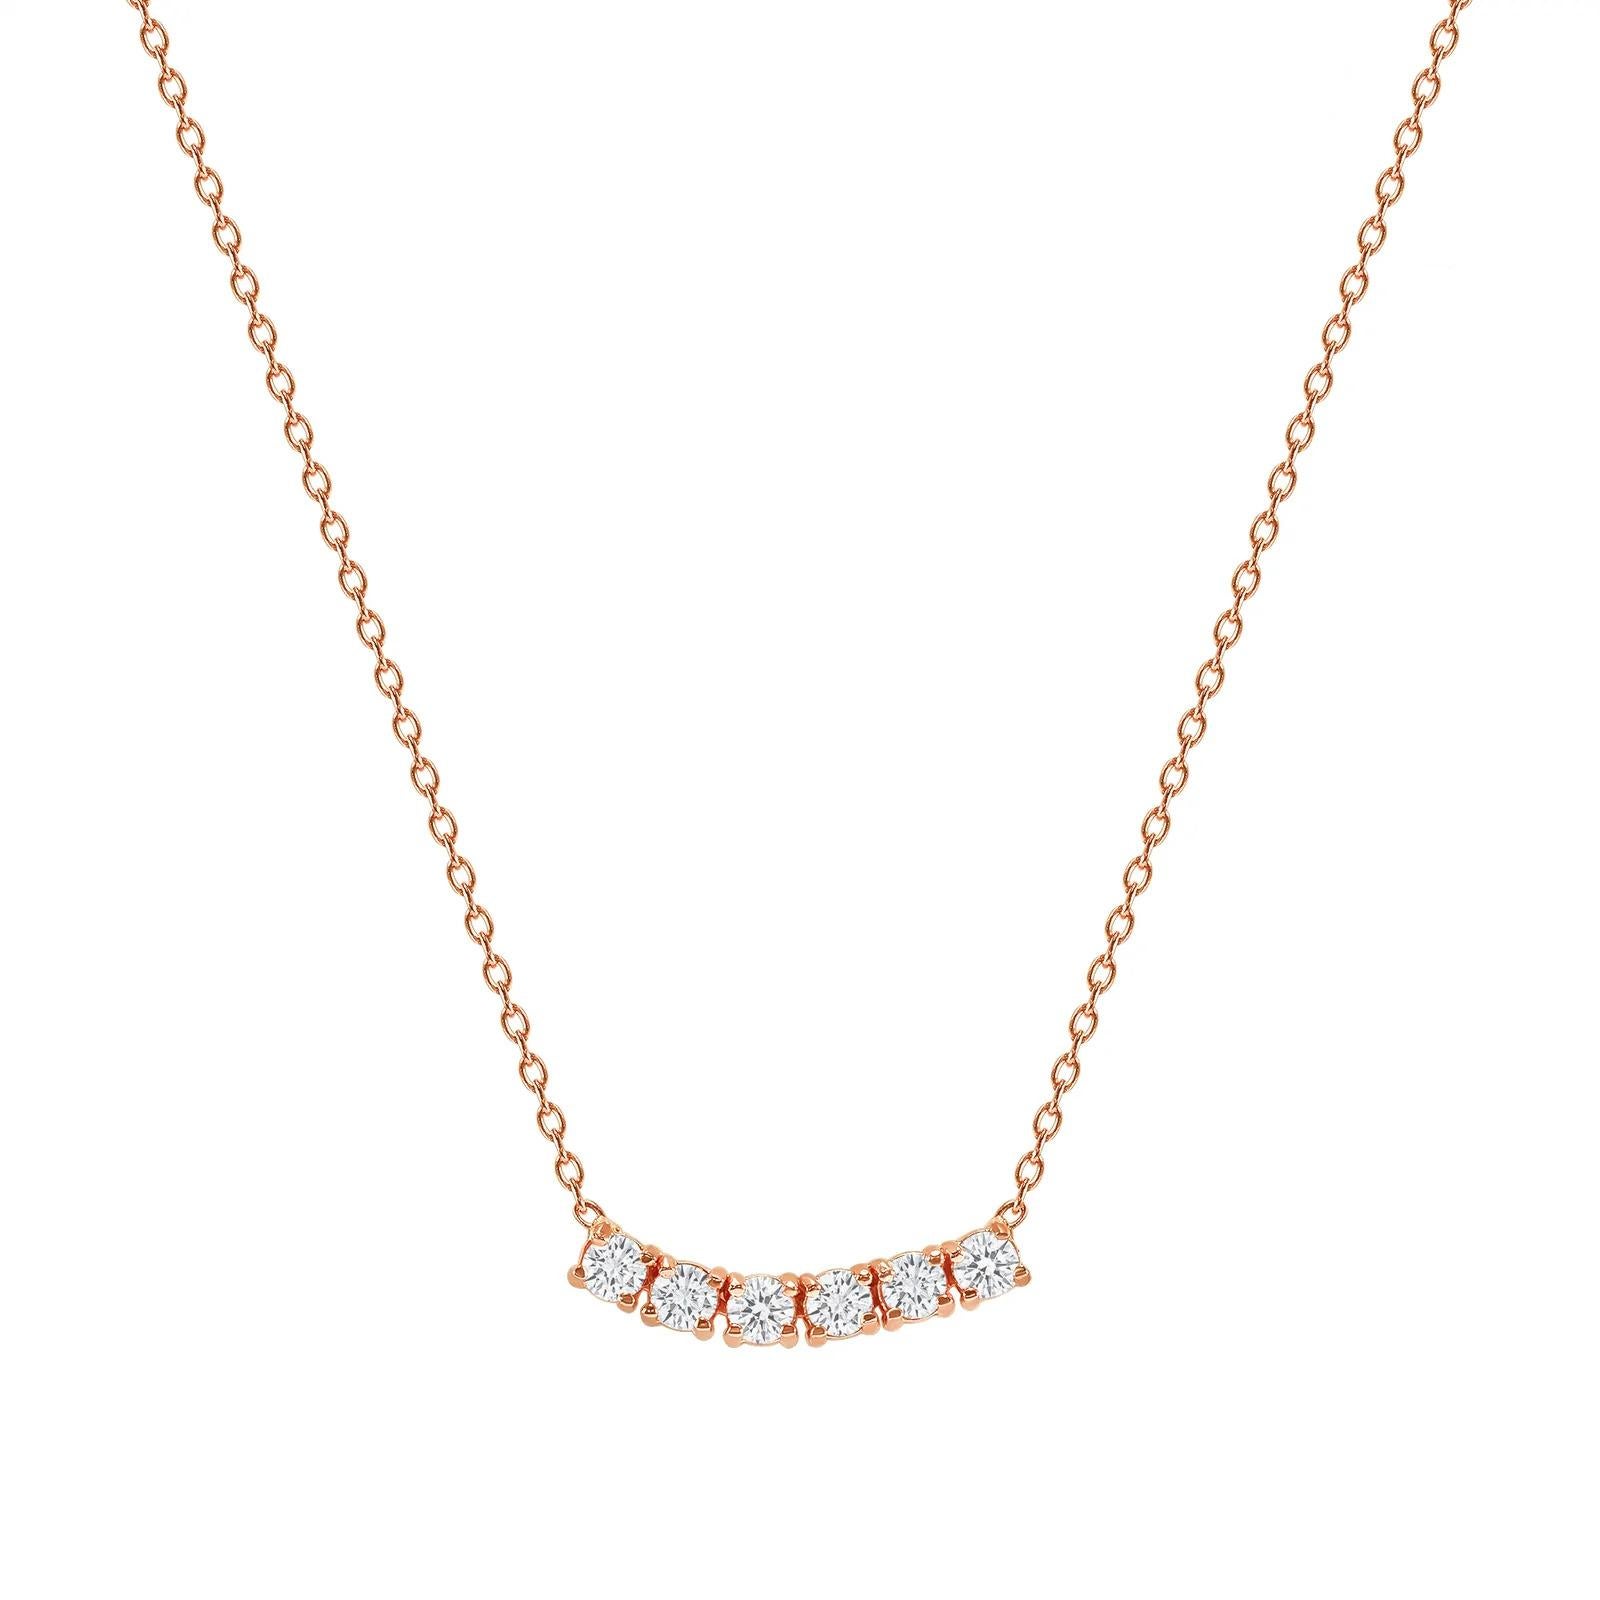 This petite, curved diamond necklace is crafted with gorgeous 14k gold set with six round diamonds.  

Gold: 14k 
Diamond Total Carats: 1 ct
Diamond Cut: Round (6 diamonds)
Diamond Clarity: VS
Diamond Color: F
Color: Rose Gold
Necklace Length: 16